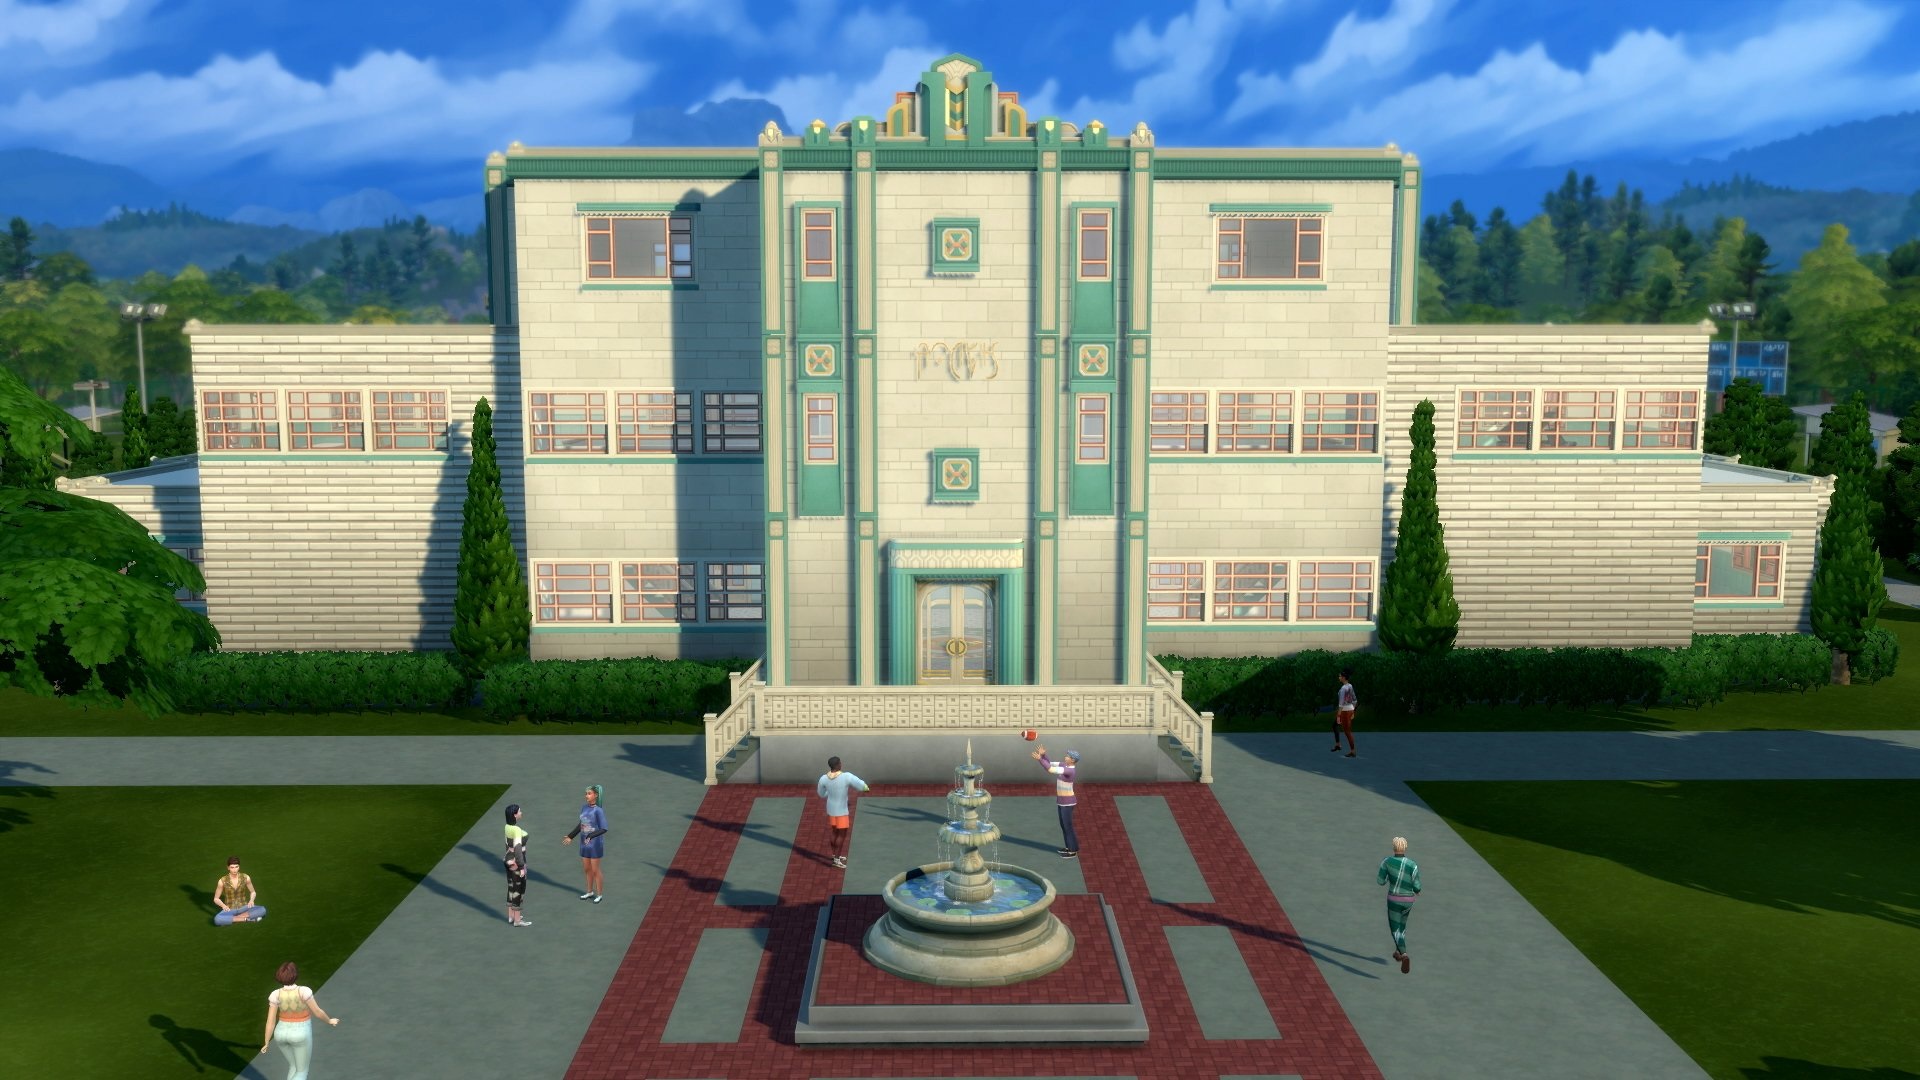 Sims 4 Runaway Teen Challenge: Rules and more